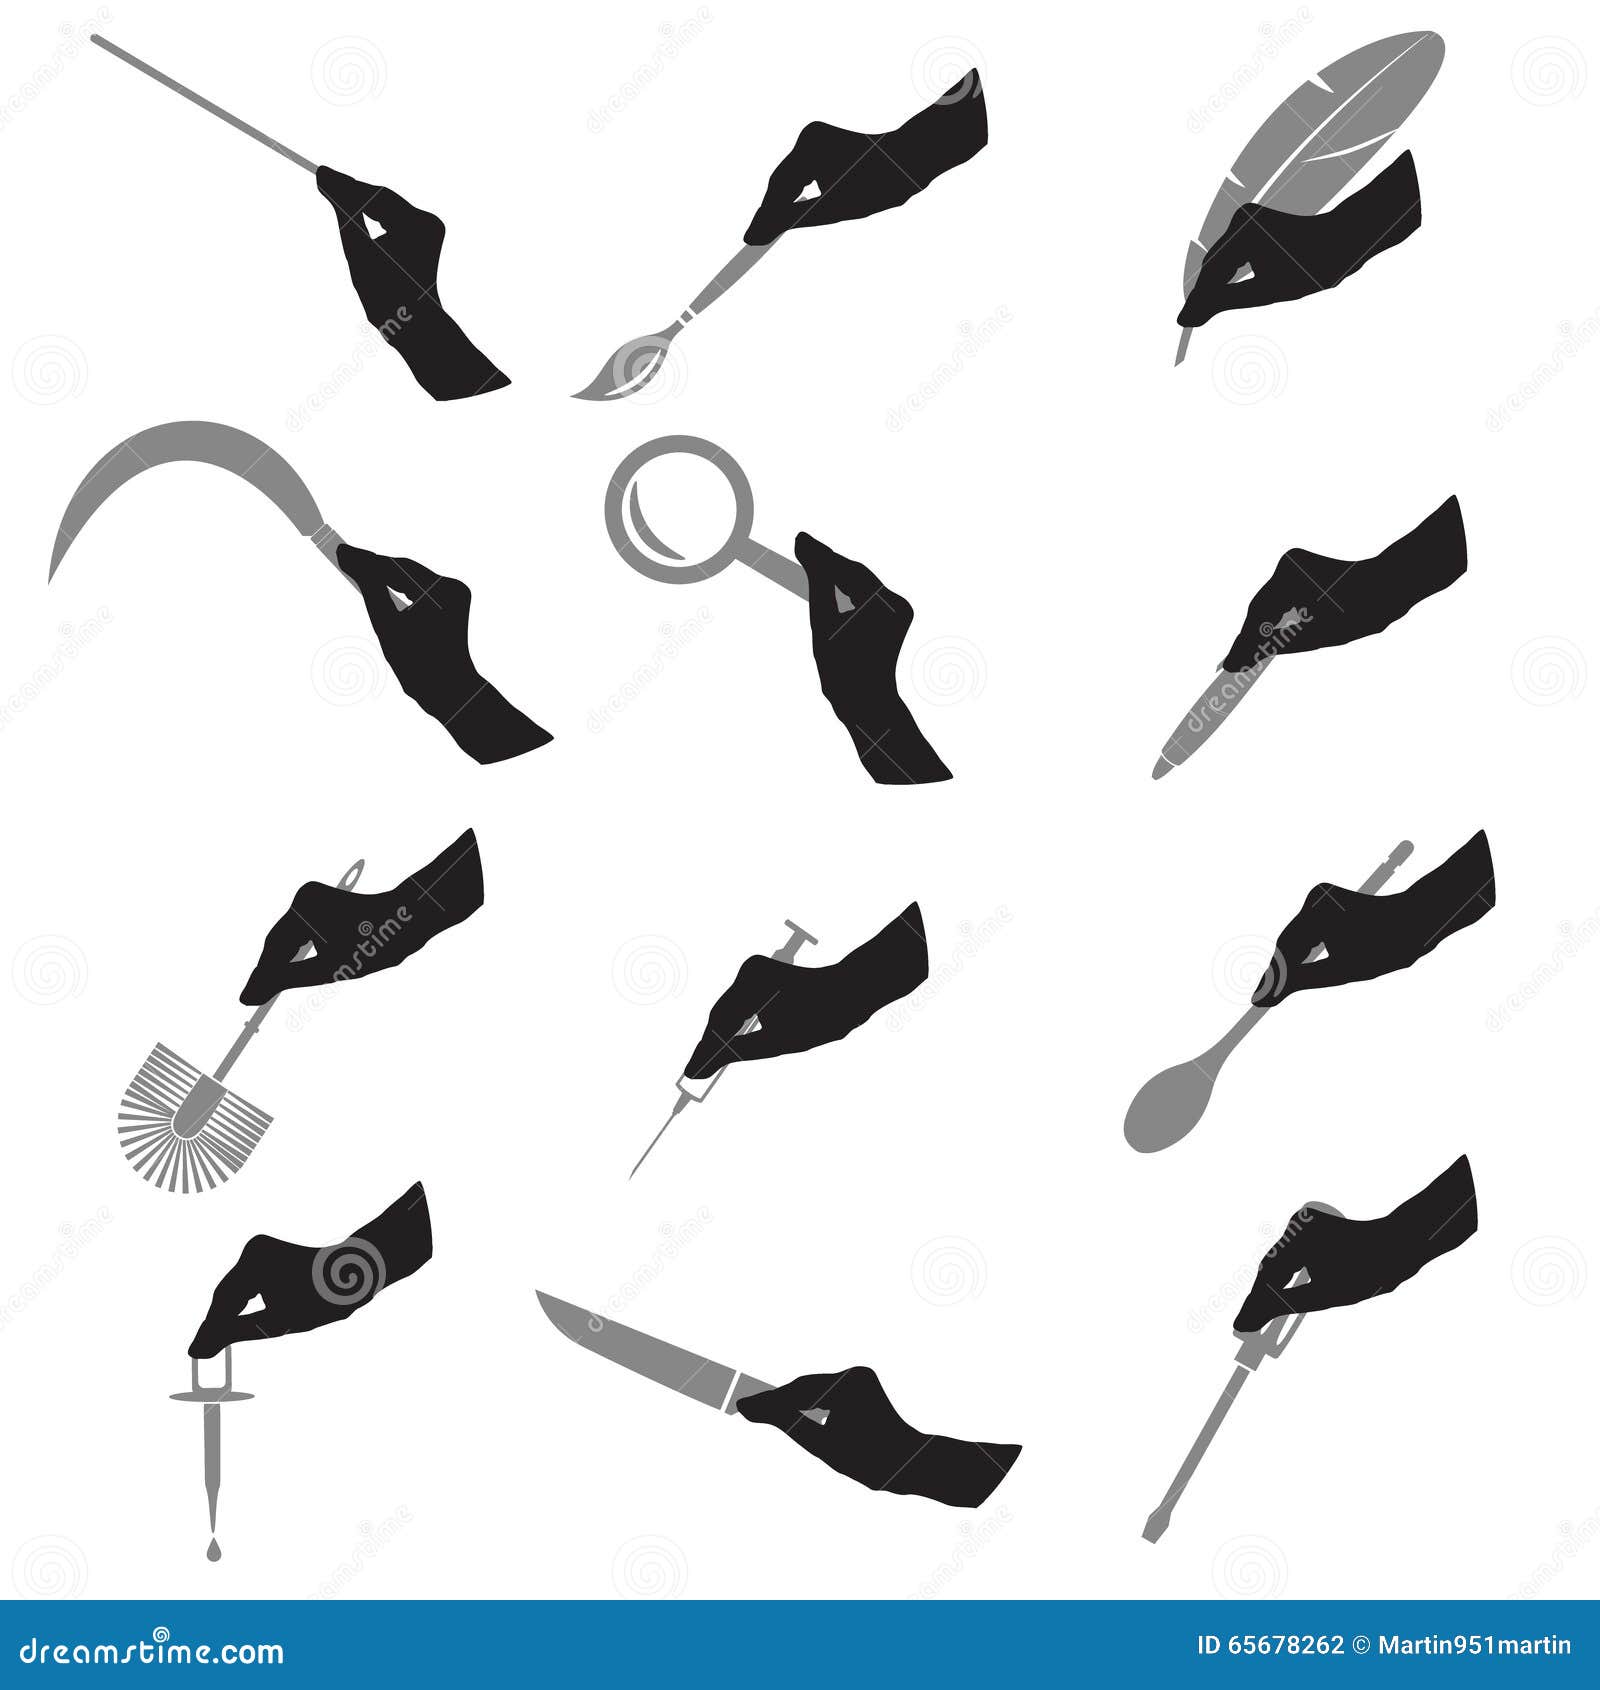 black silhouette of hans with various tools